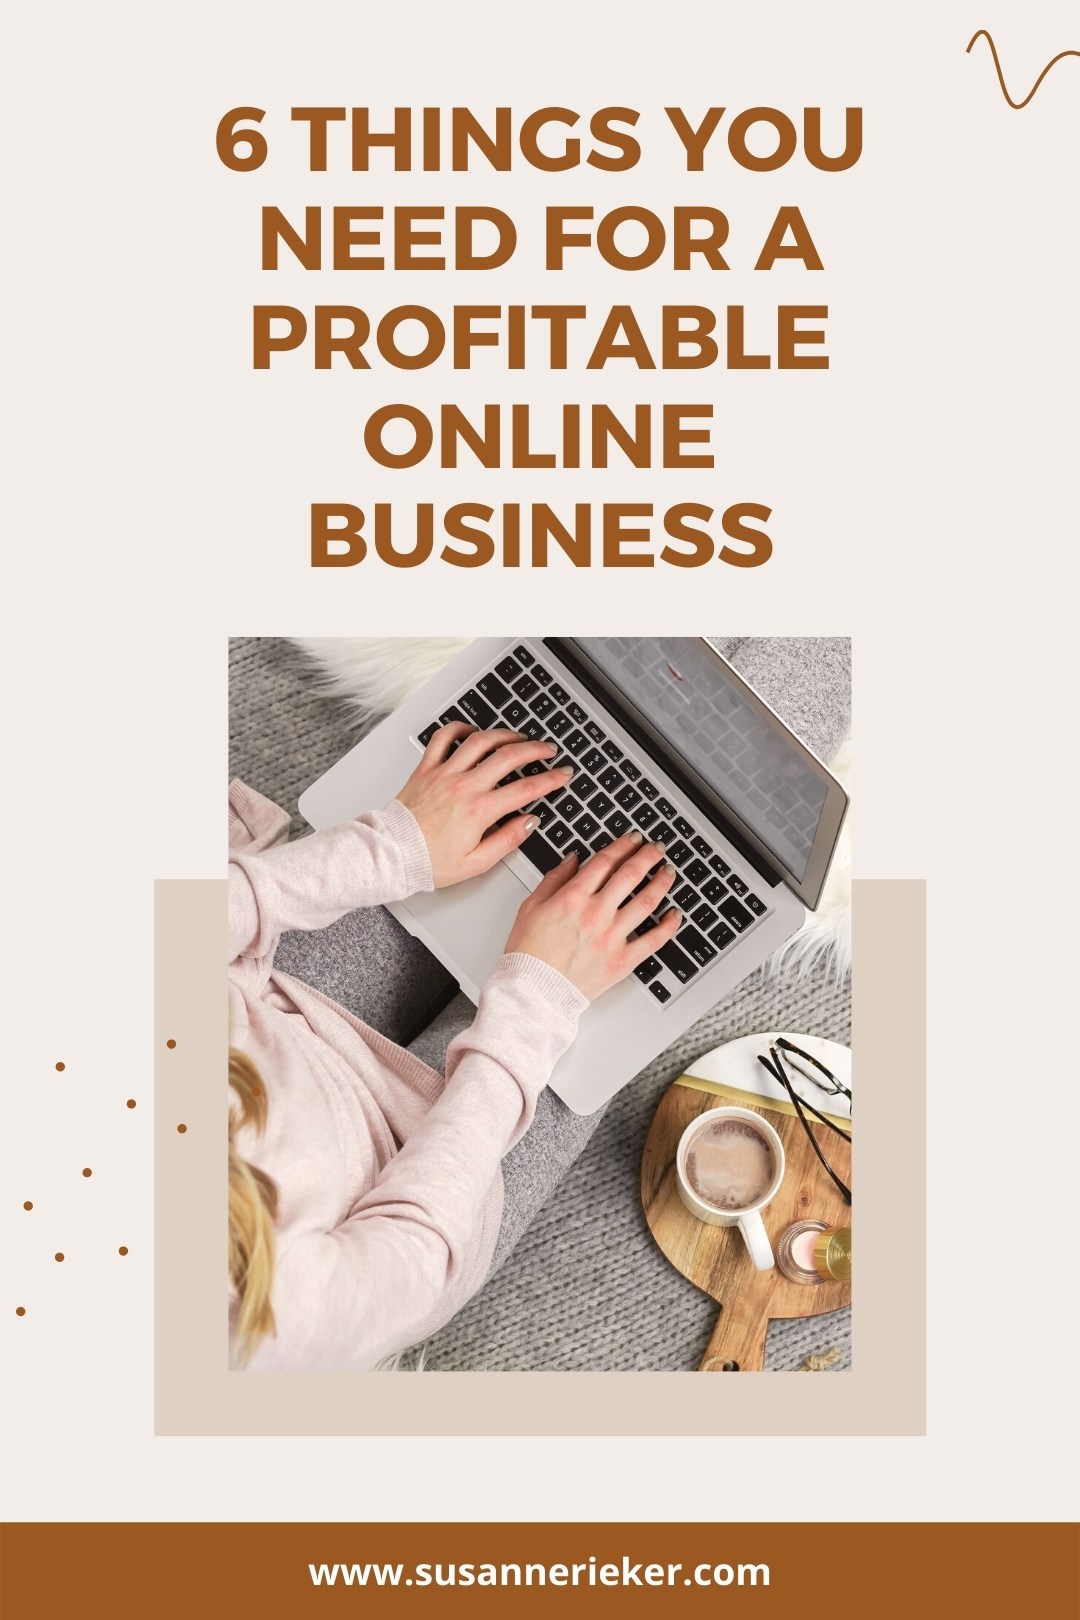 6 Things You Need for a Profitable Online Business that Earns You a Fulltime Income